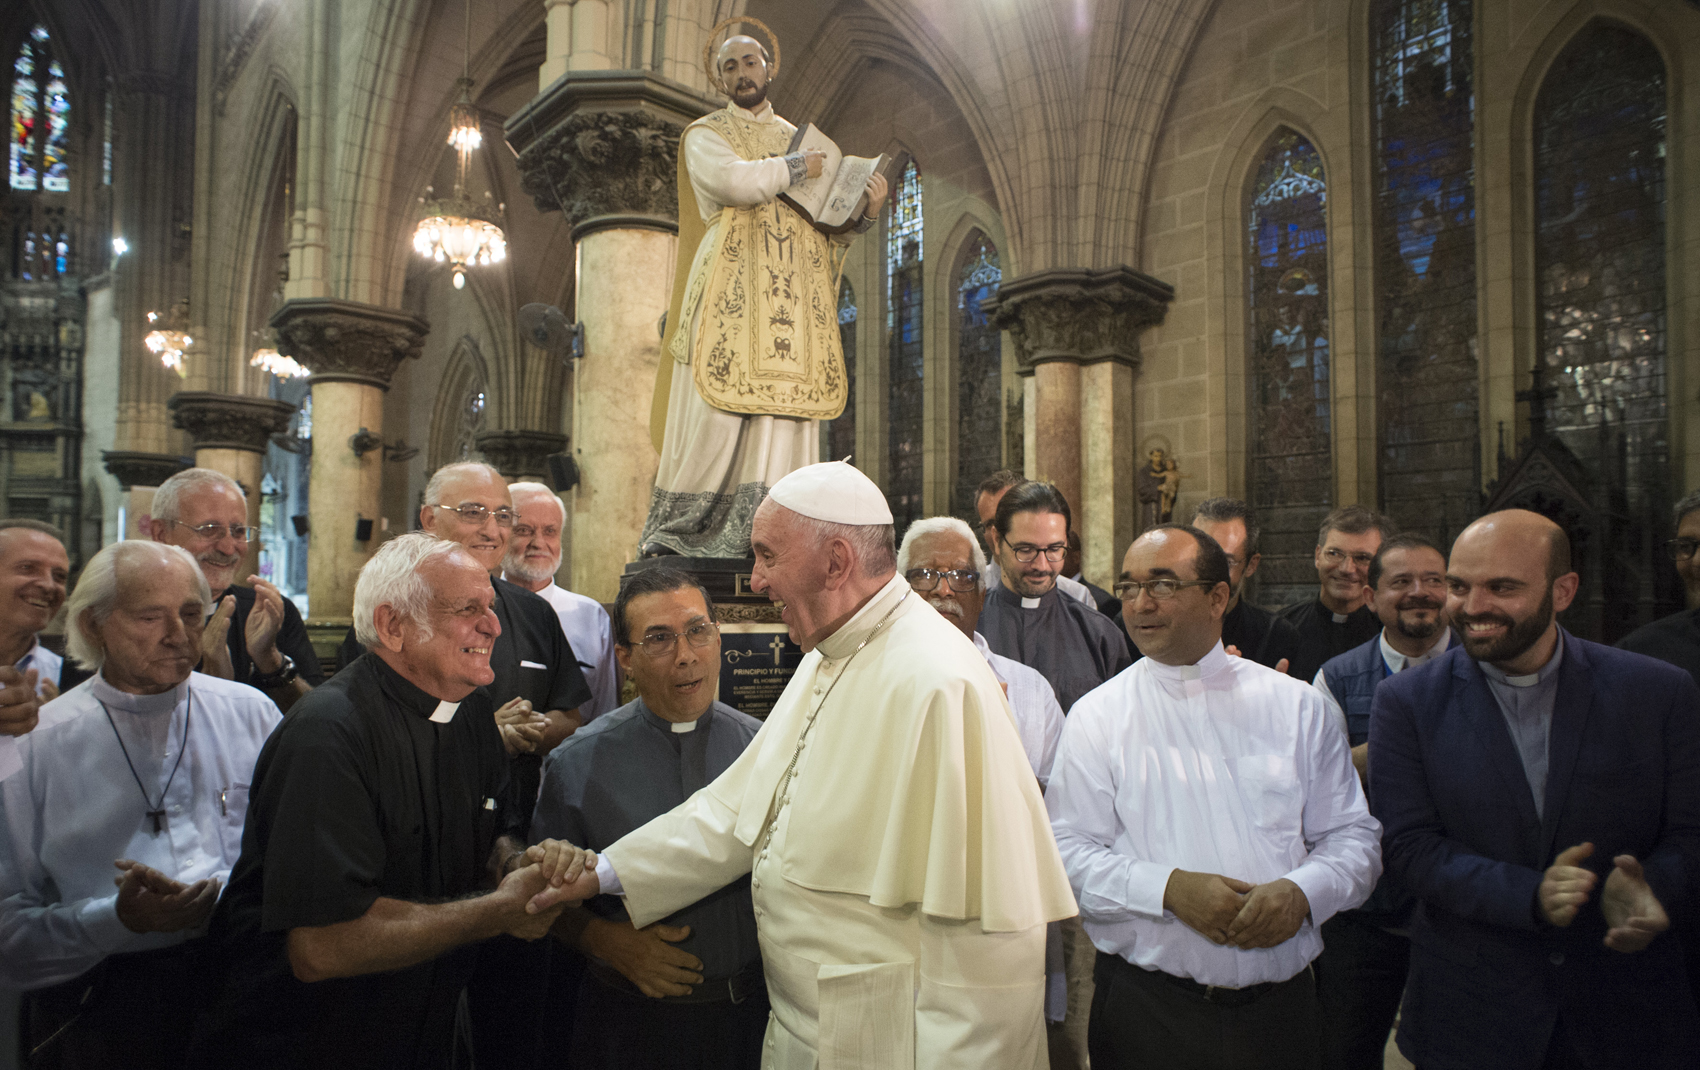 Pope Francis' visit at the Jesuit-run parish of the Sacred Heart of Jesus and St. Ignatius of Loyola